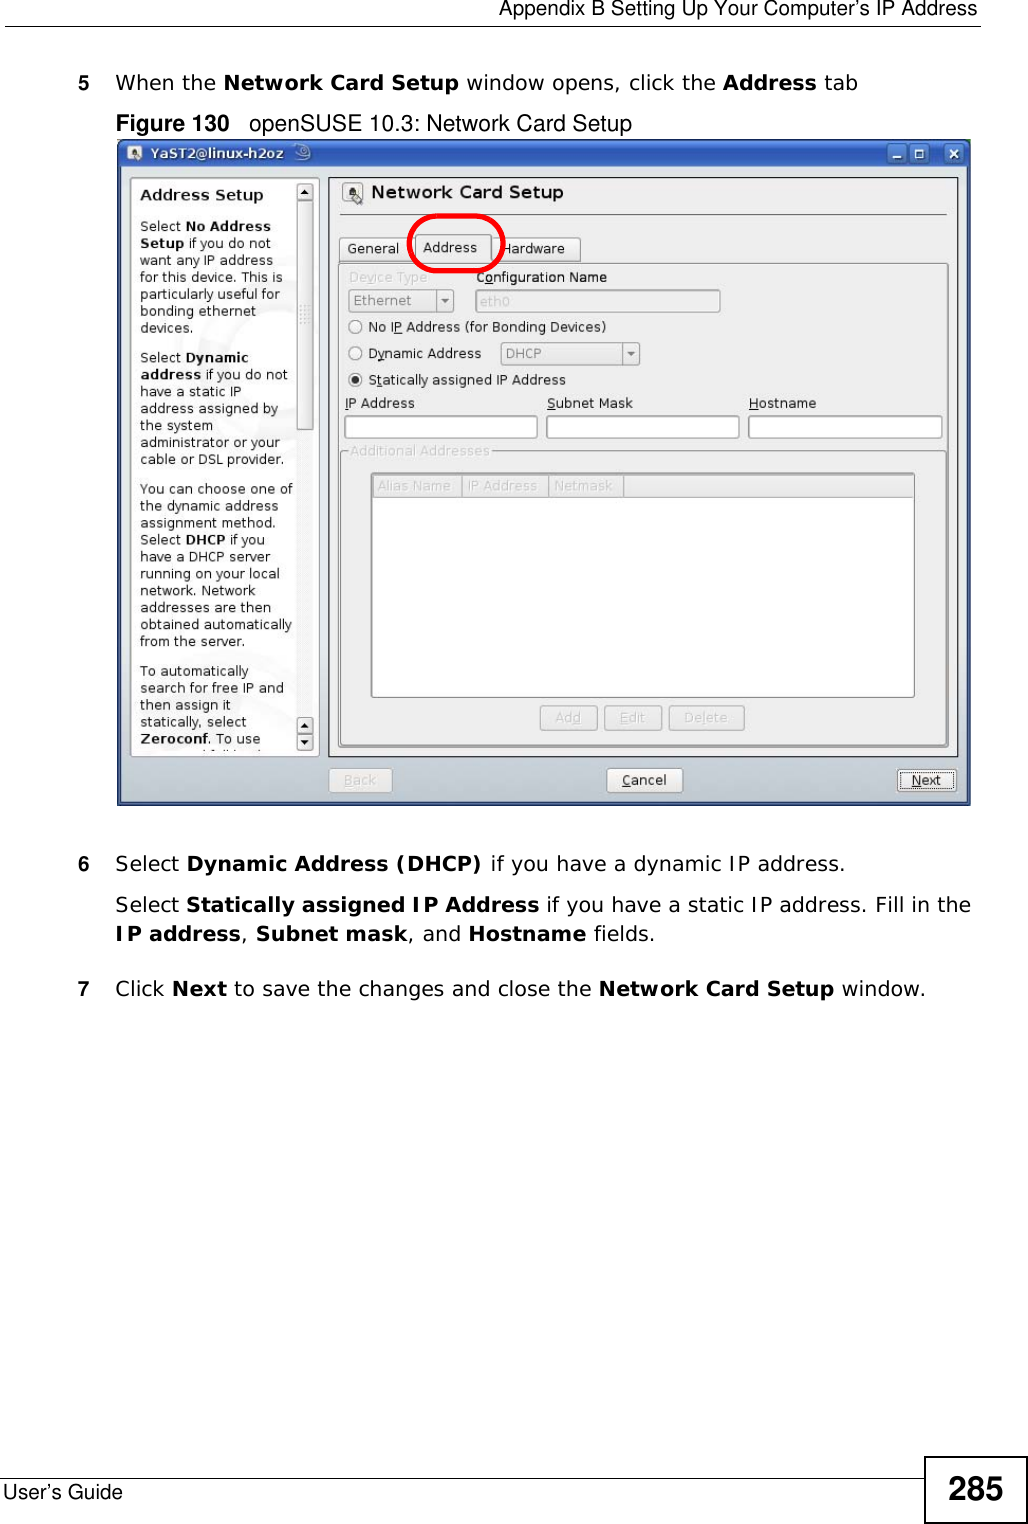  Appendix B Setting Up Your Computer’s IP AddressUser’s Guide 2855When the Network Card Setup window opens, click the Address tabFigure 130   openSUSE 10.3: Network Card Setup6Select Dynamic Address (DHCP) if you have a dynamic IP address.Select Statically assigned IP Address if you have a static IP address. Fill in the IP address, Subnet mask, and Hostname fields.7Click Next to save the changes and close the Network Card Setup window. 